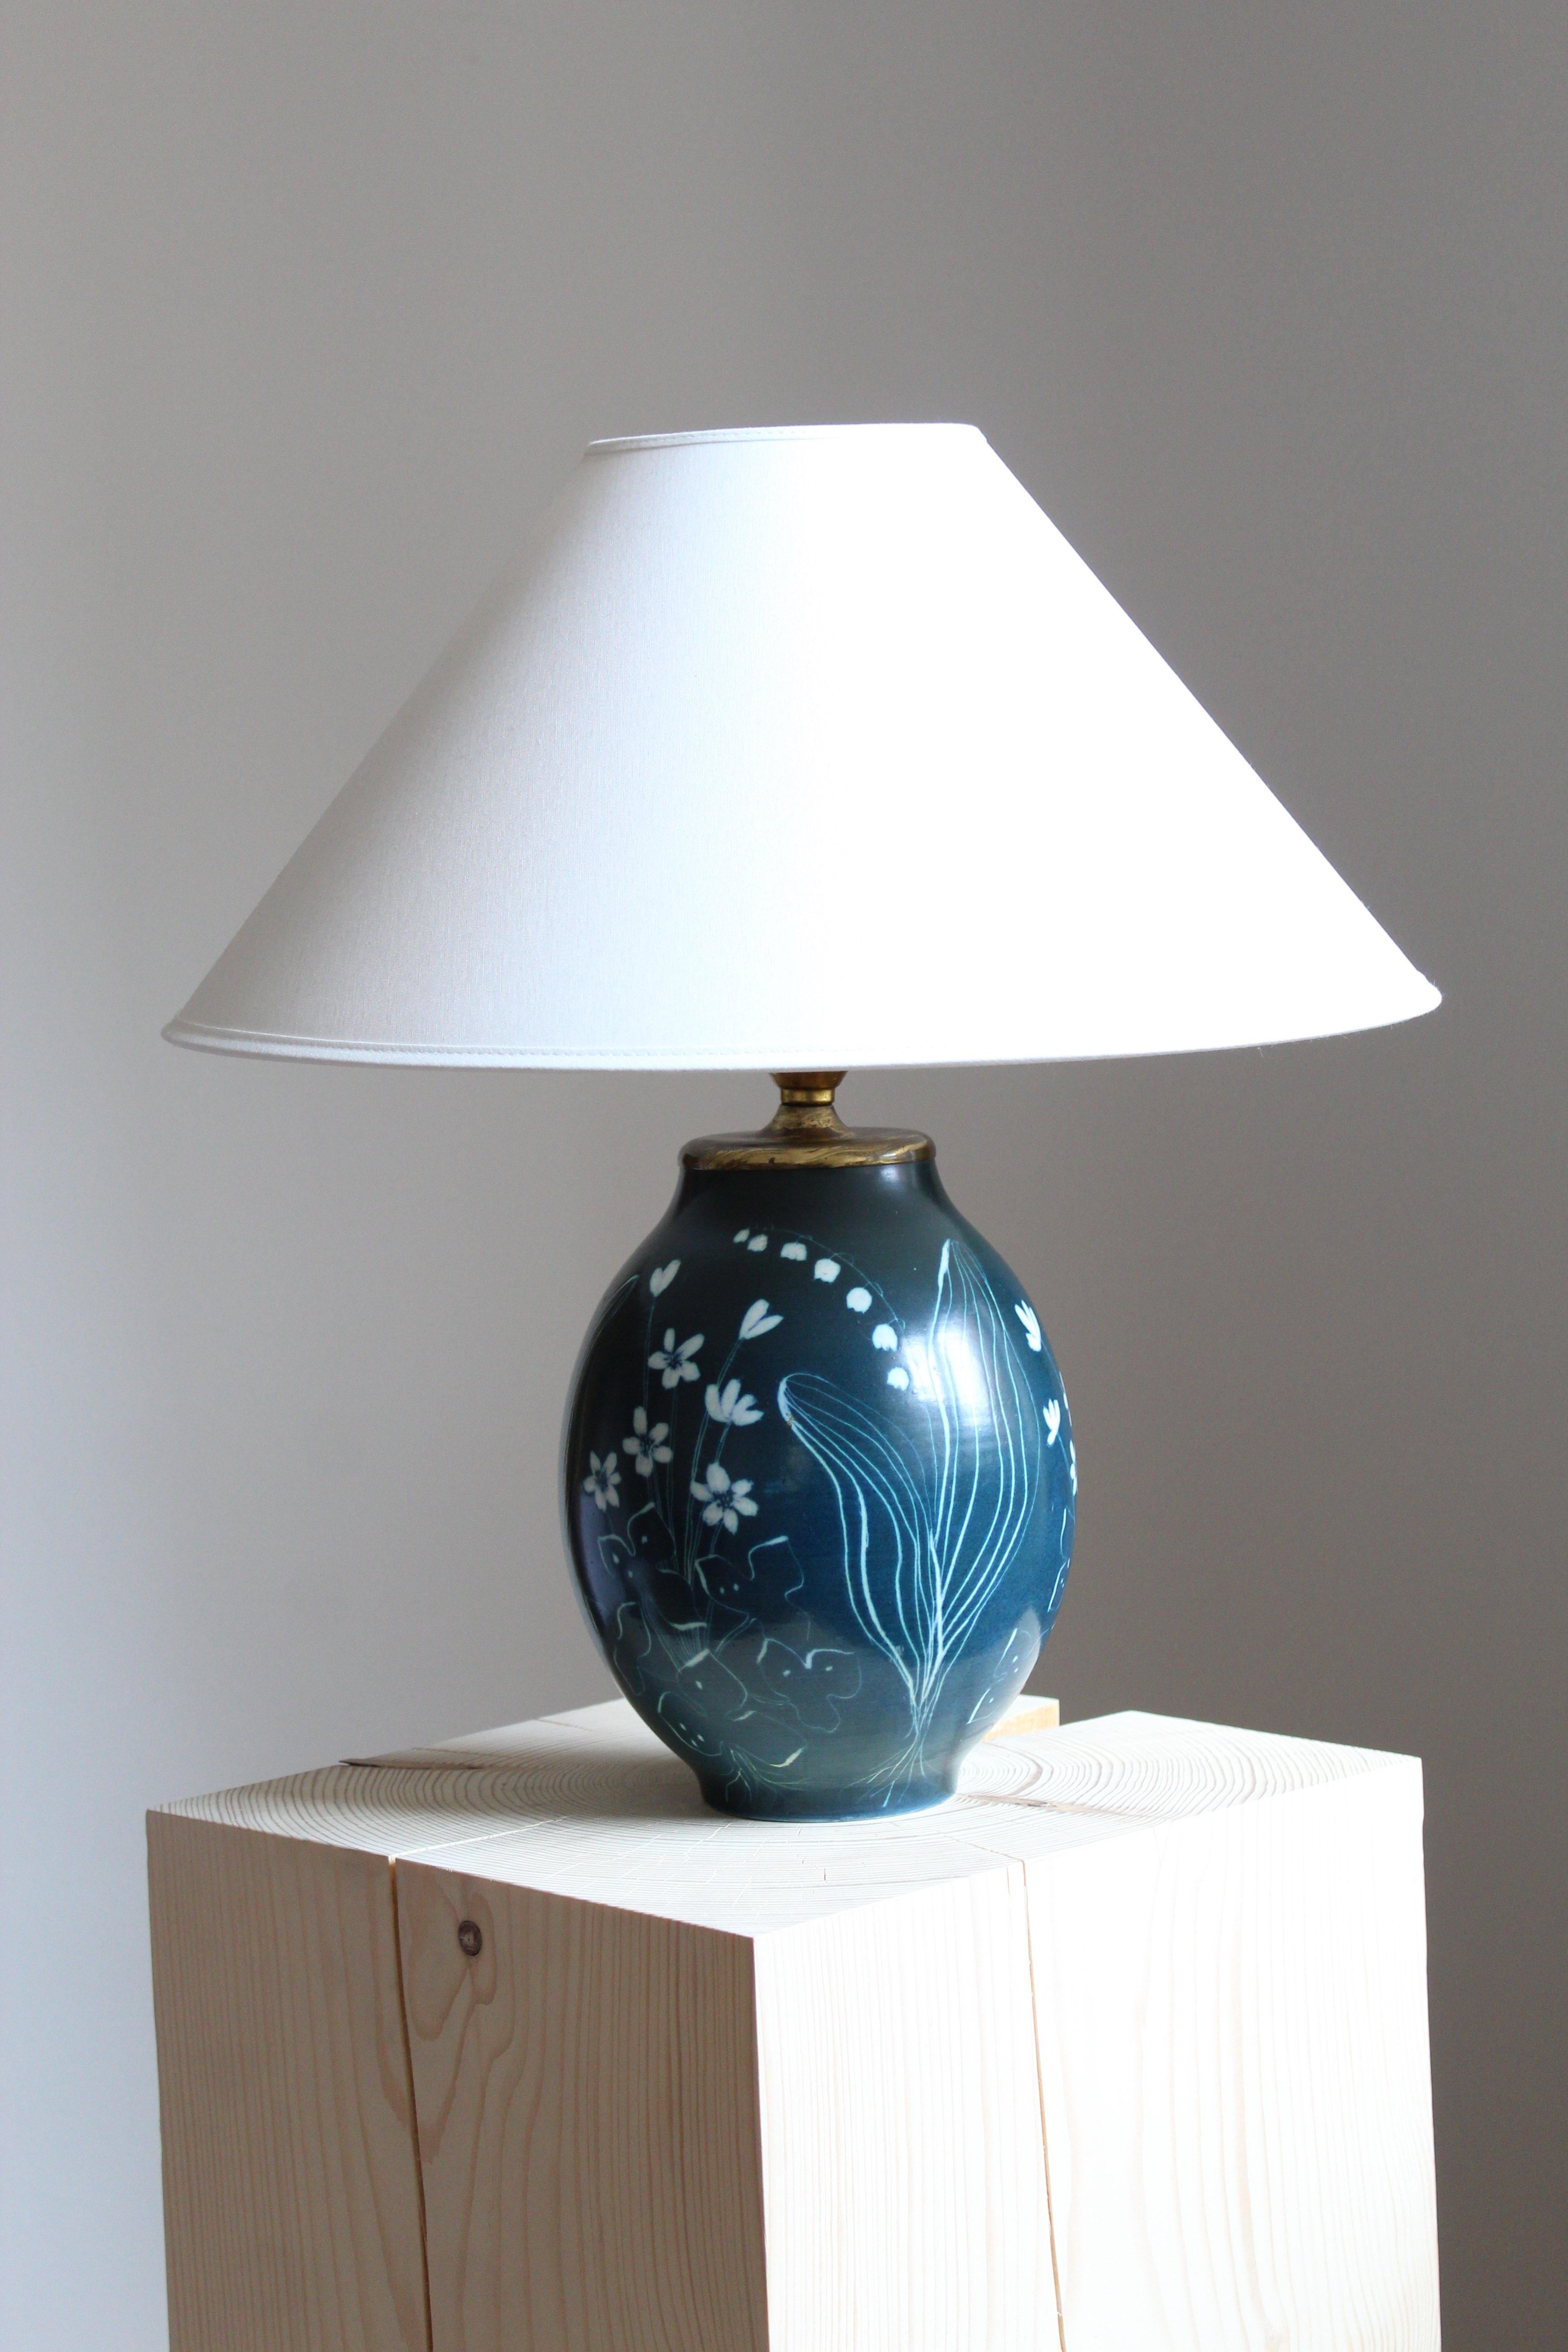 A table lamp produced by Rörstrand, Sweden, 1950. Designed by Hertha Bengtsson, (Swedish, 1914-1997). Signed.

Sold without lampshade. Stated dimensions excluding lampshade.

Other ceramicists of the period include Axel Salto, Carl-Harry